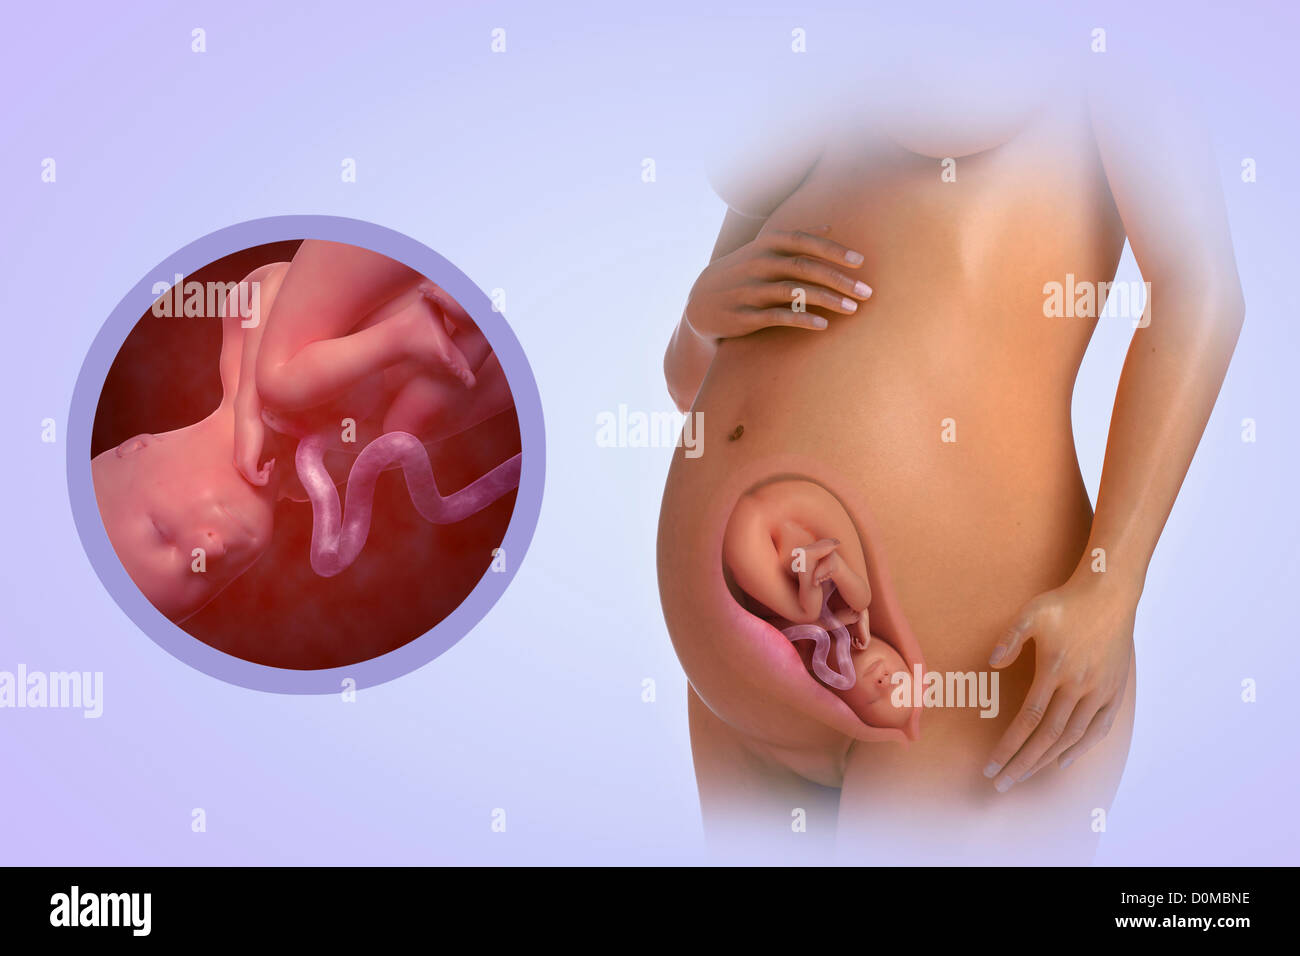 A human model showing pregnancy at week 29. Stock Photo